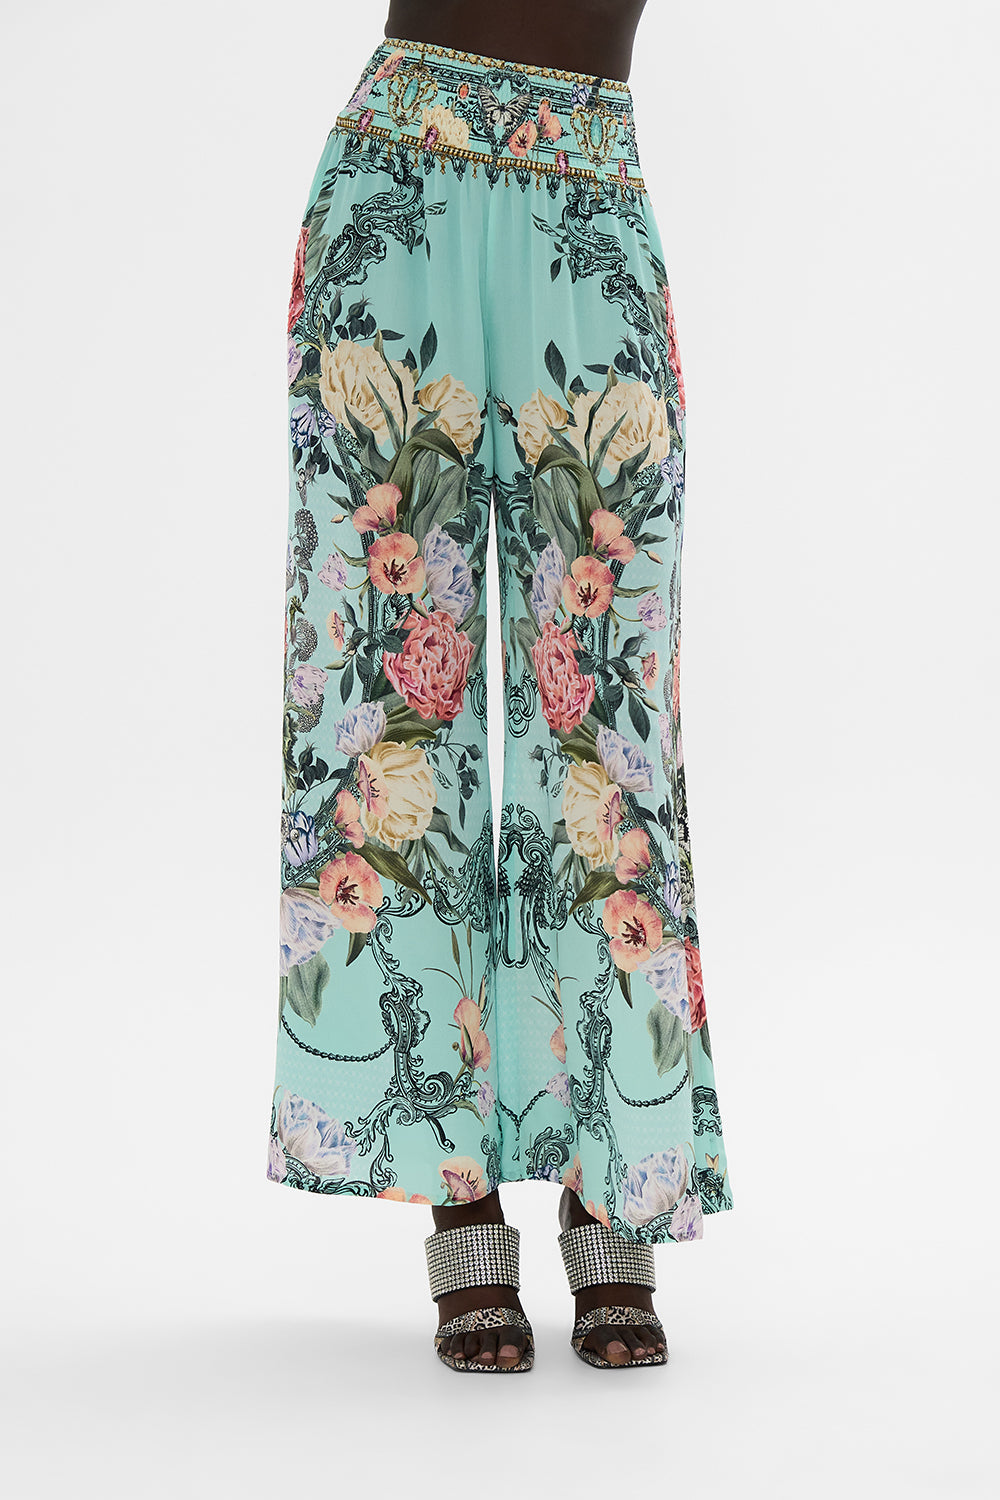 CAMILLA Floral Shirred Waist Pant in Petal Promise Land